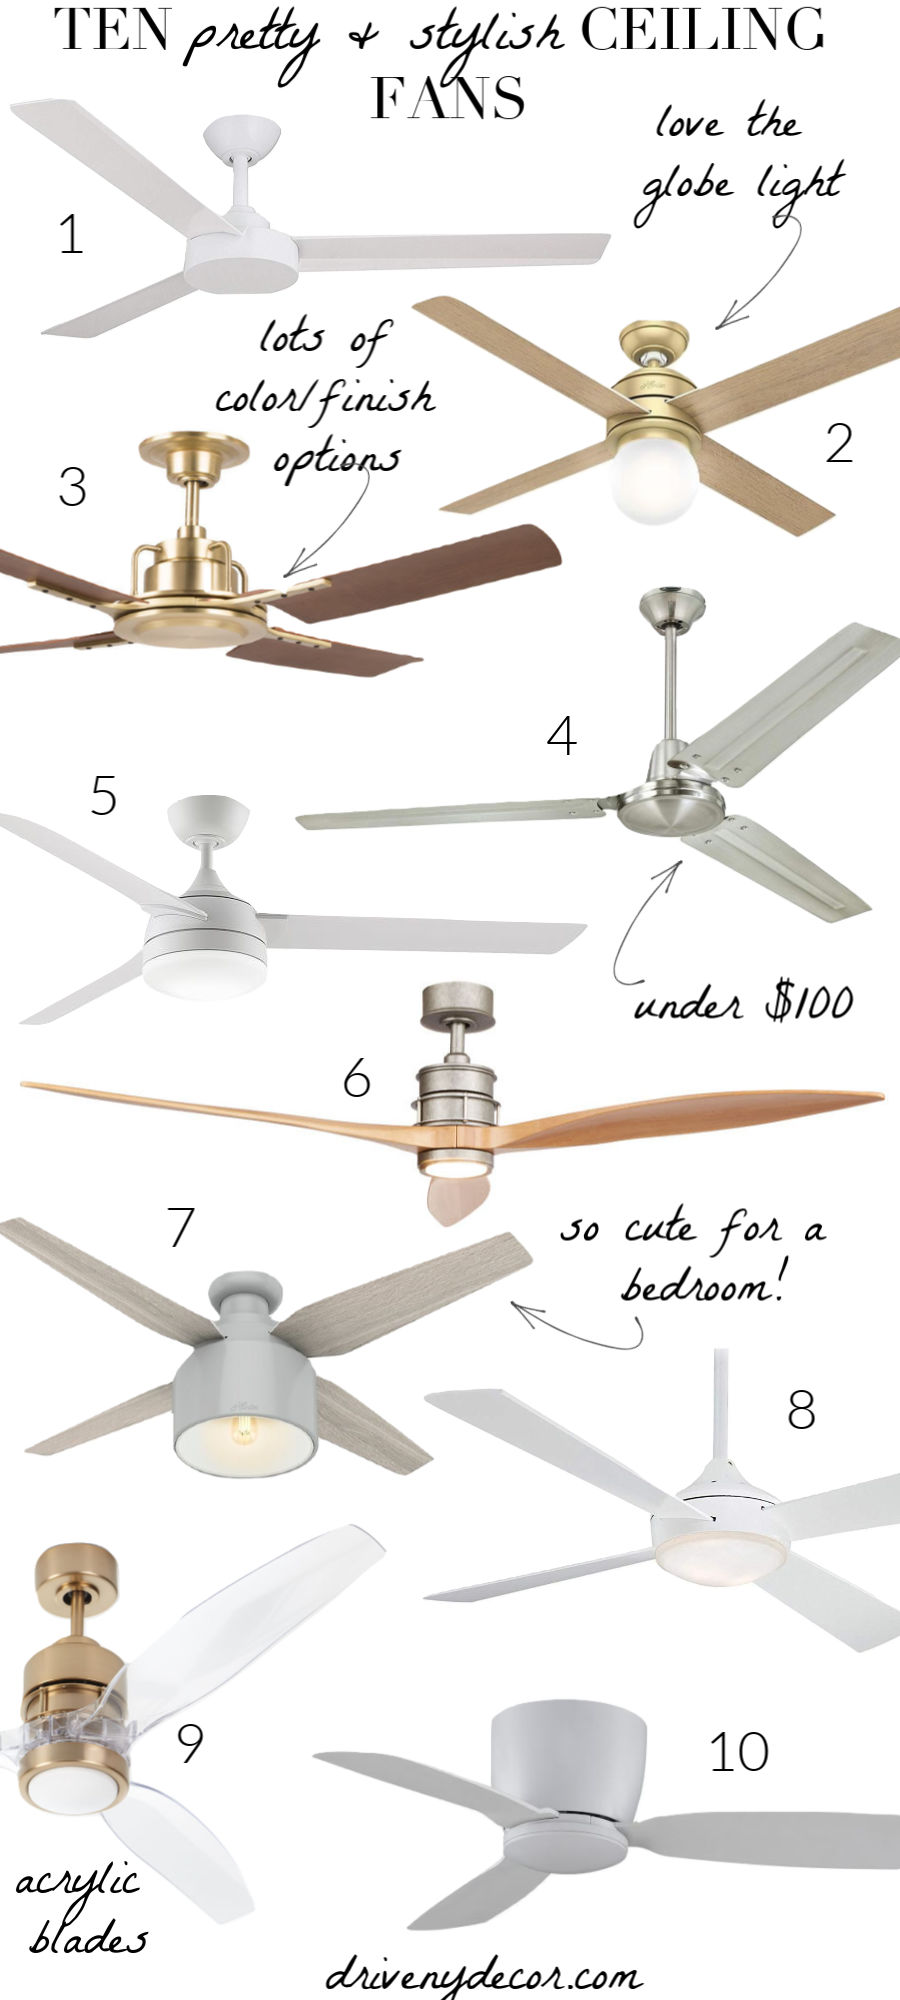 Ten Stylish Ceiling Fans Its Time To Kick Your Dated Ones To The Curb Driven By Decor